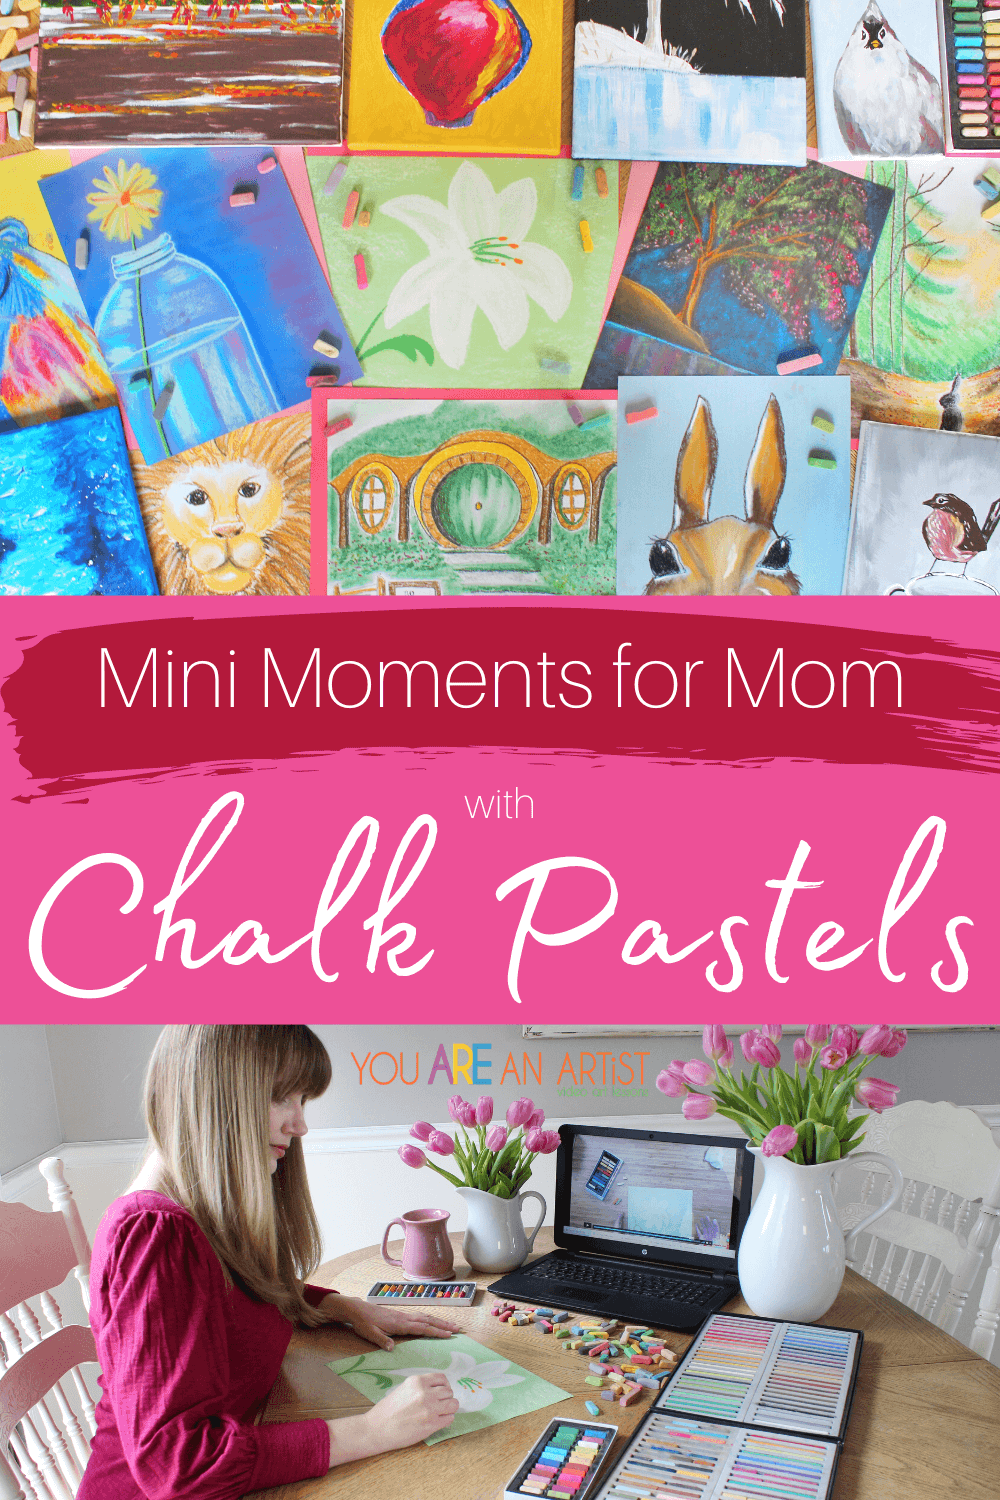 Mini Moments for Mom with Chalk Pastels: Whether you 5 minutes, 10 minutes, 20 minutes, or more, take the time to recharge your spirit with these mini moments for moms. Even busy moms can appreciate the simplicity and ease of chalk pastels. No super long supply list is needed! Just a starter set of chalk pastels, a pack of construction paper, and a few moments is all that required for a mom to reconnect with herself and a love of art. #momlife #momtime #motherhood #mom #relaxation #selfcare #minimomentsformoms #momselfcare #momart